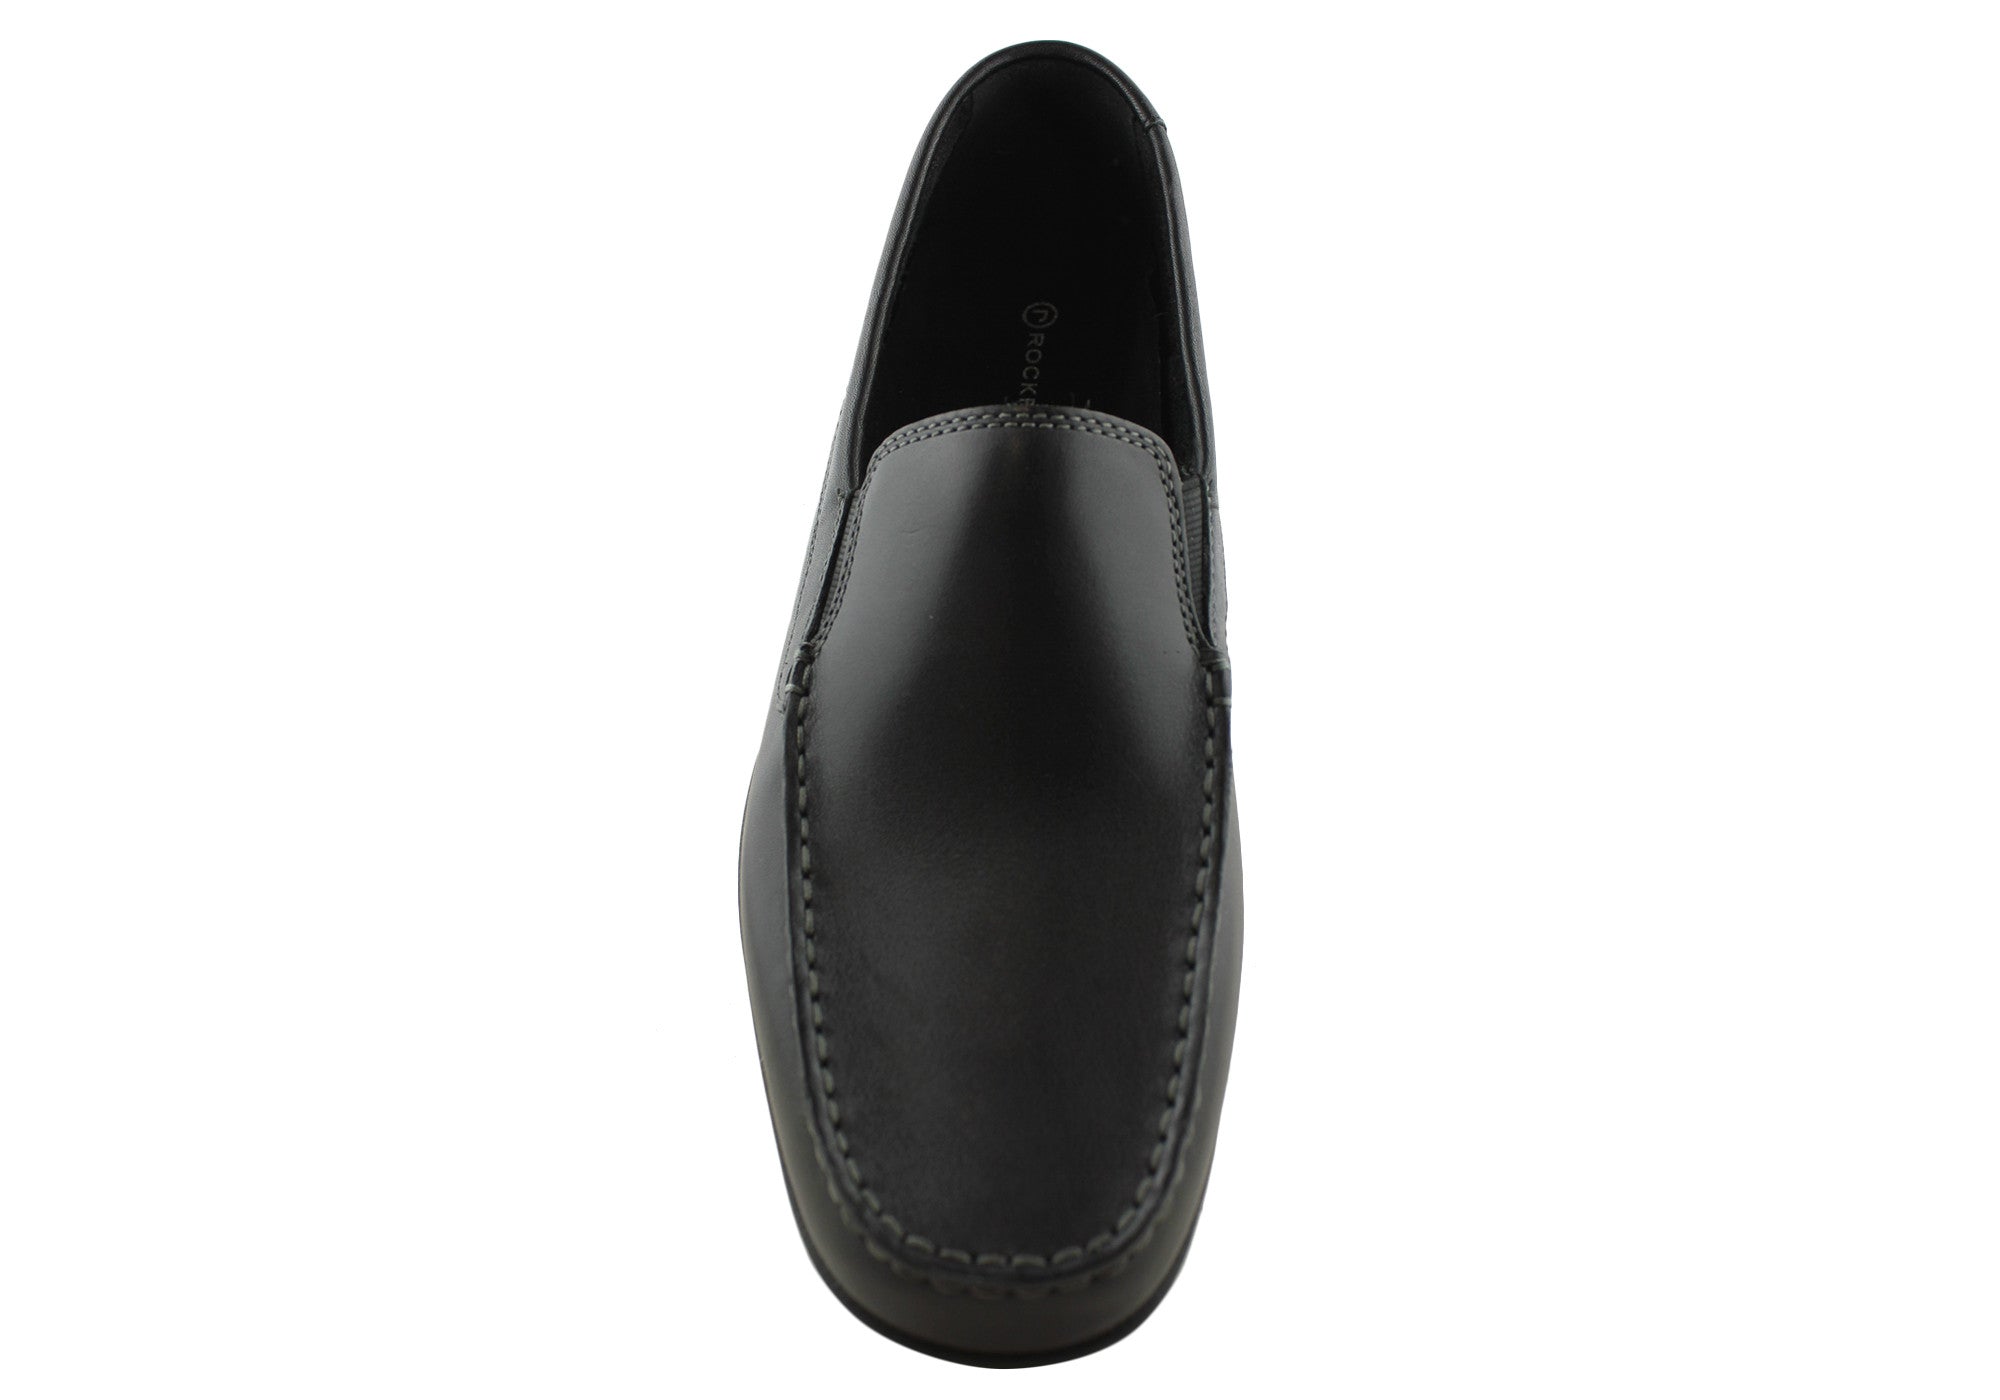 Rockport Cape Noble 2 Mens Comfortable Leather Loafers